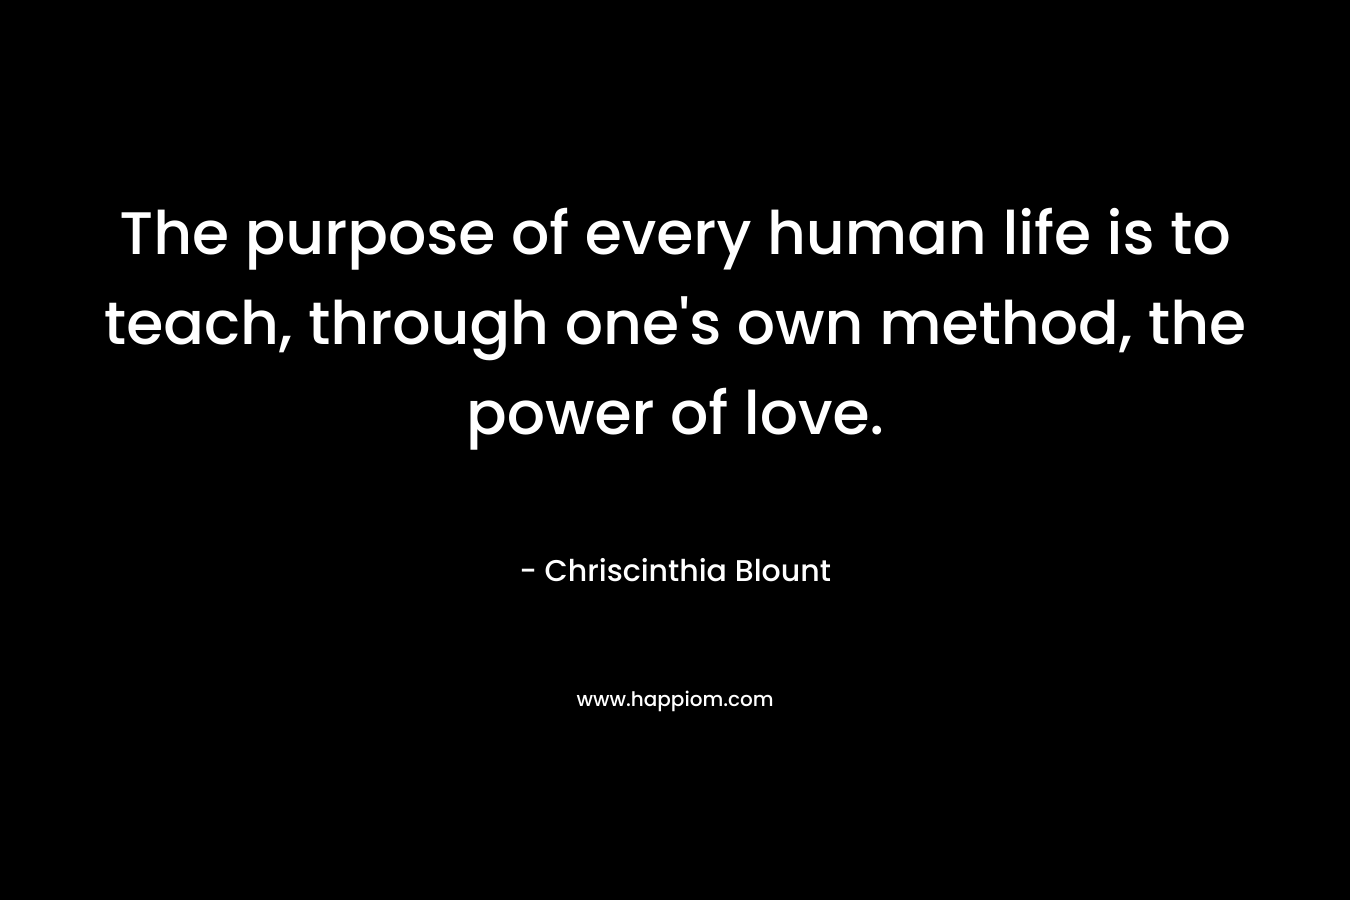 The purpose of every human life is to teach, through one’s own method, the power of love. – Chriscinthia Blount